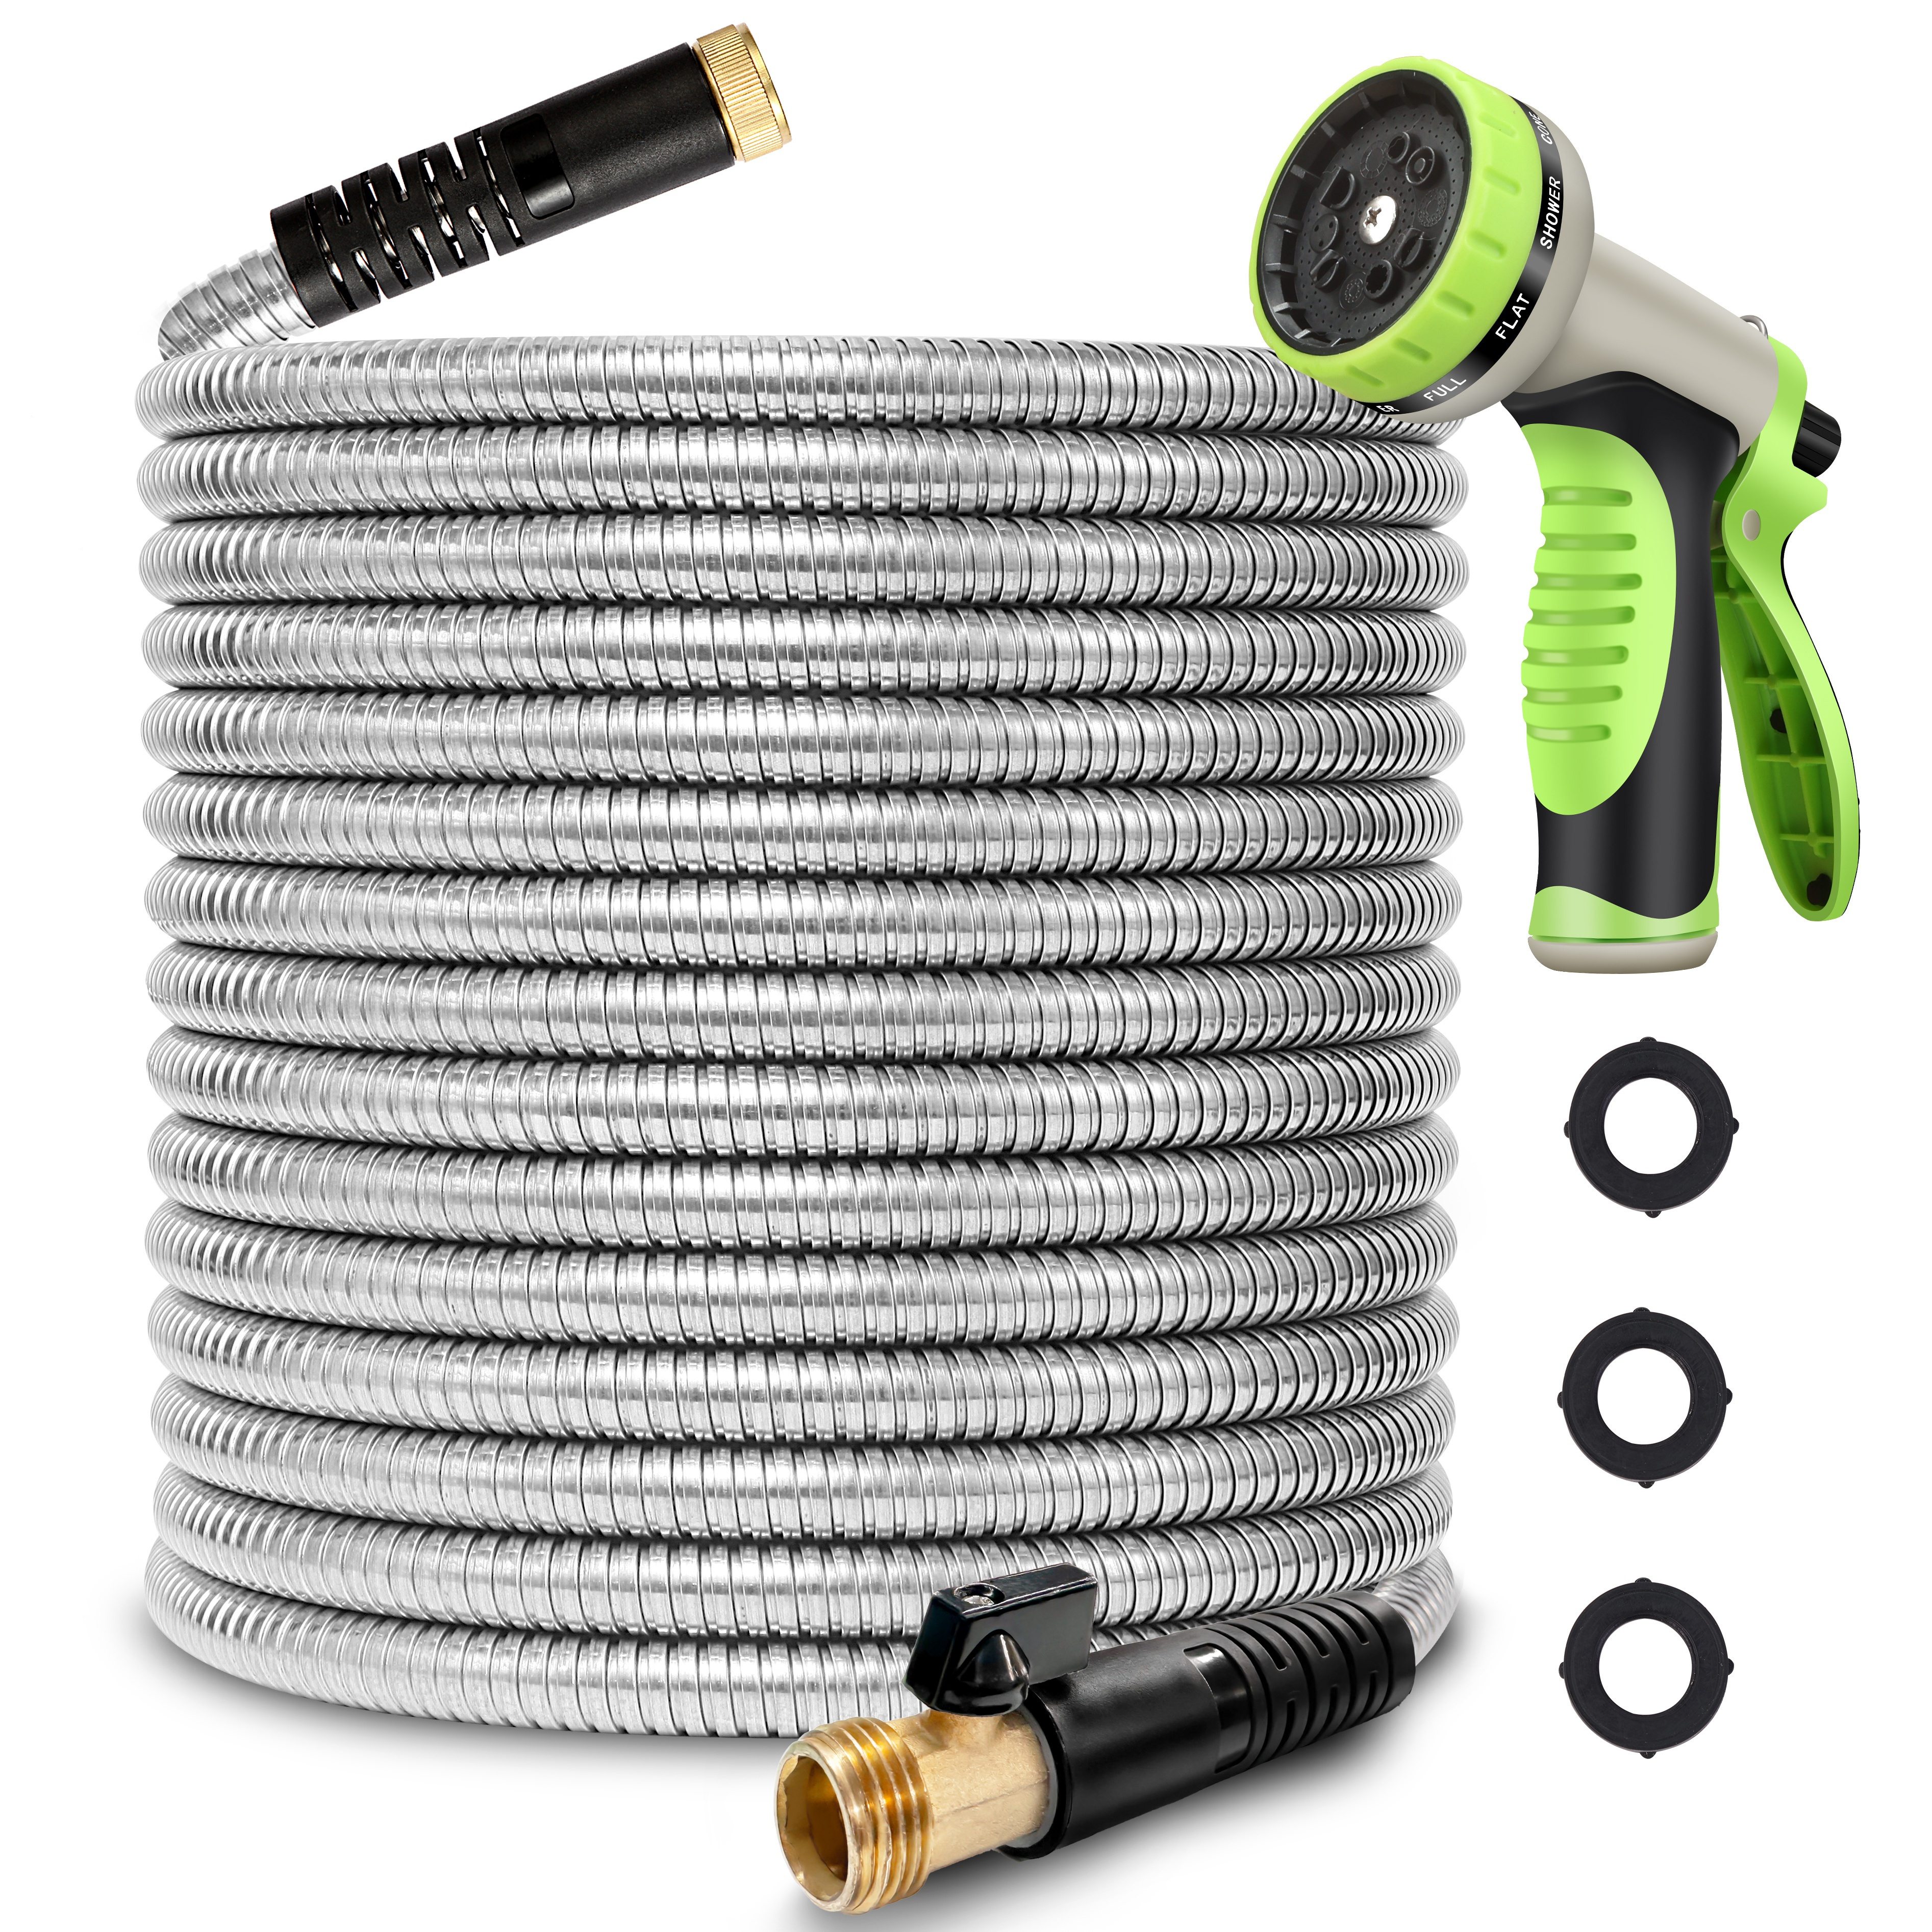 

75ft Metal Garden Hose 304 Stainless Steel Flexible Water Hose - No Kink & Heavy Duty Pipe With Nozzle, Durable 3/4 Brass Fittings And Valve - Rust Proof Puncture Proof For Yard Lawn